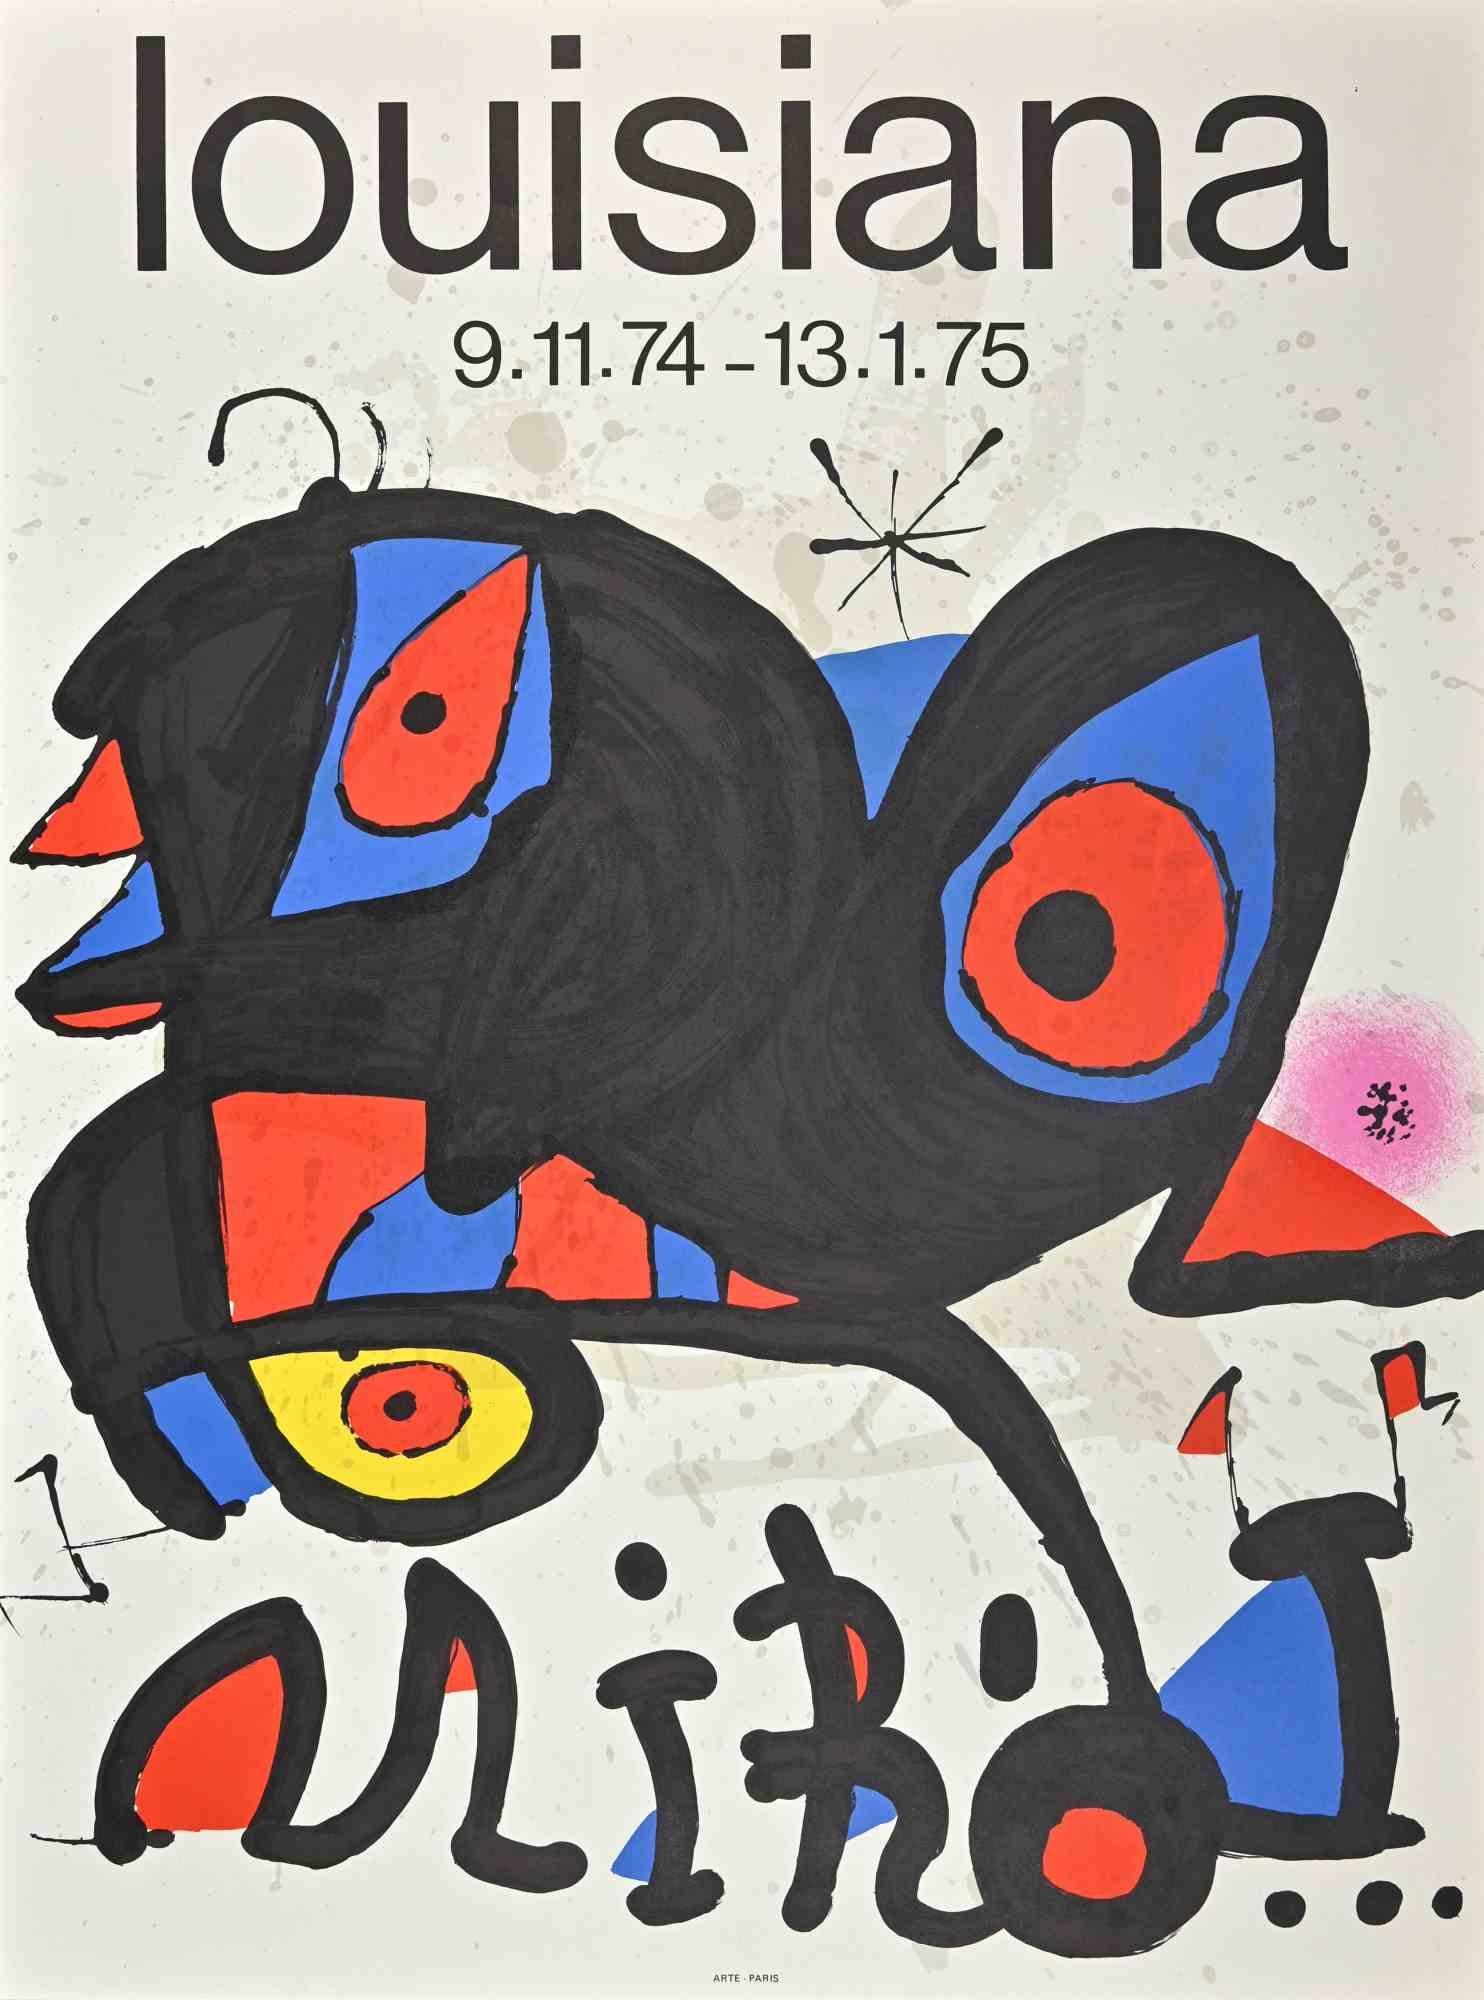 (after) Joan Miró Abstract Print - Louisiana - Lithograph and Offset poster after Joan Mirò - 1974